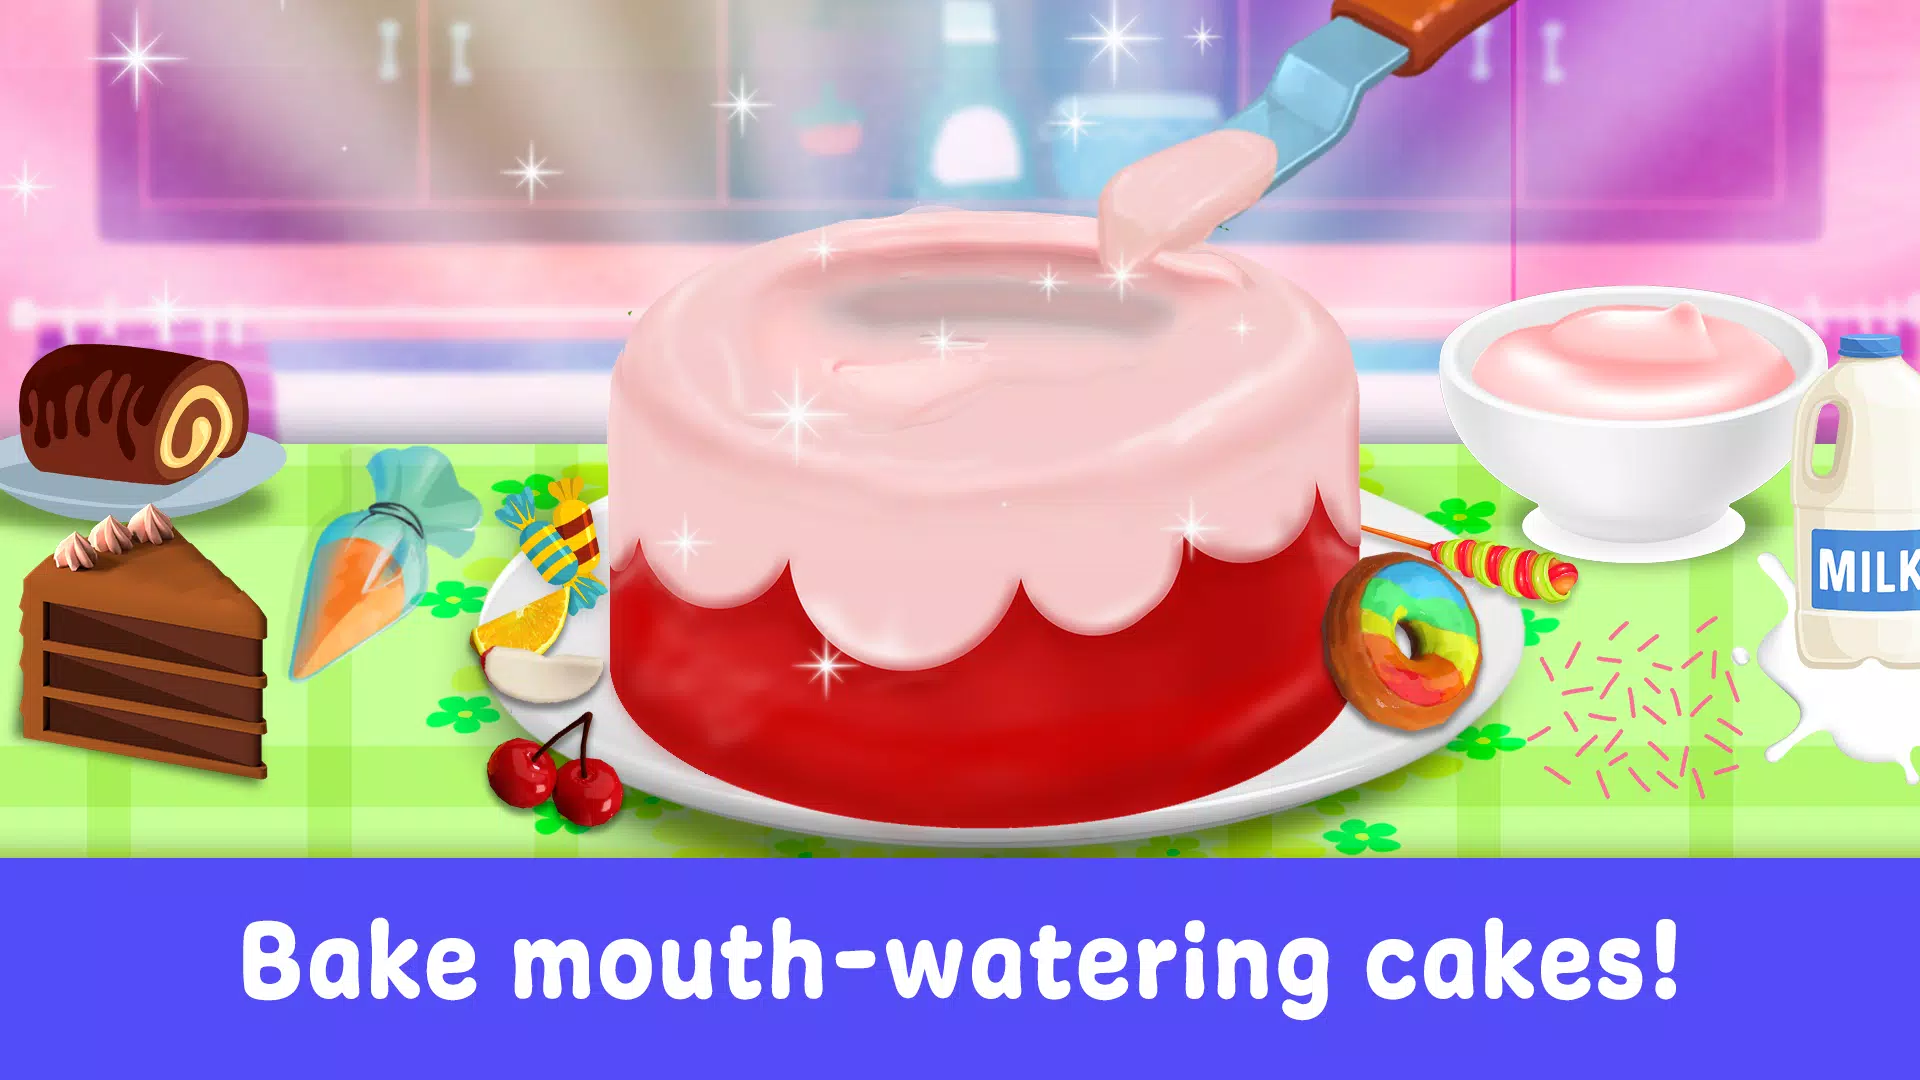 Make Cake : Cooking Games APK for Android Download